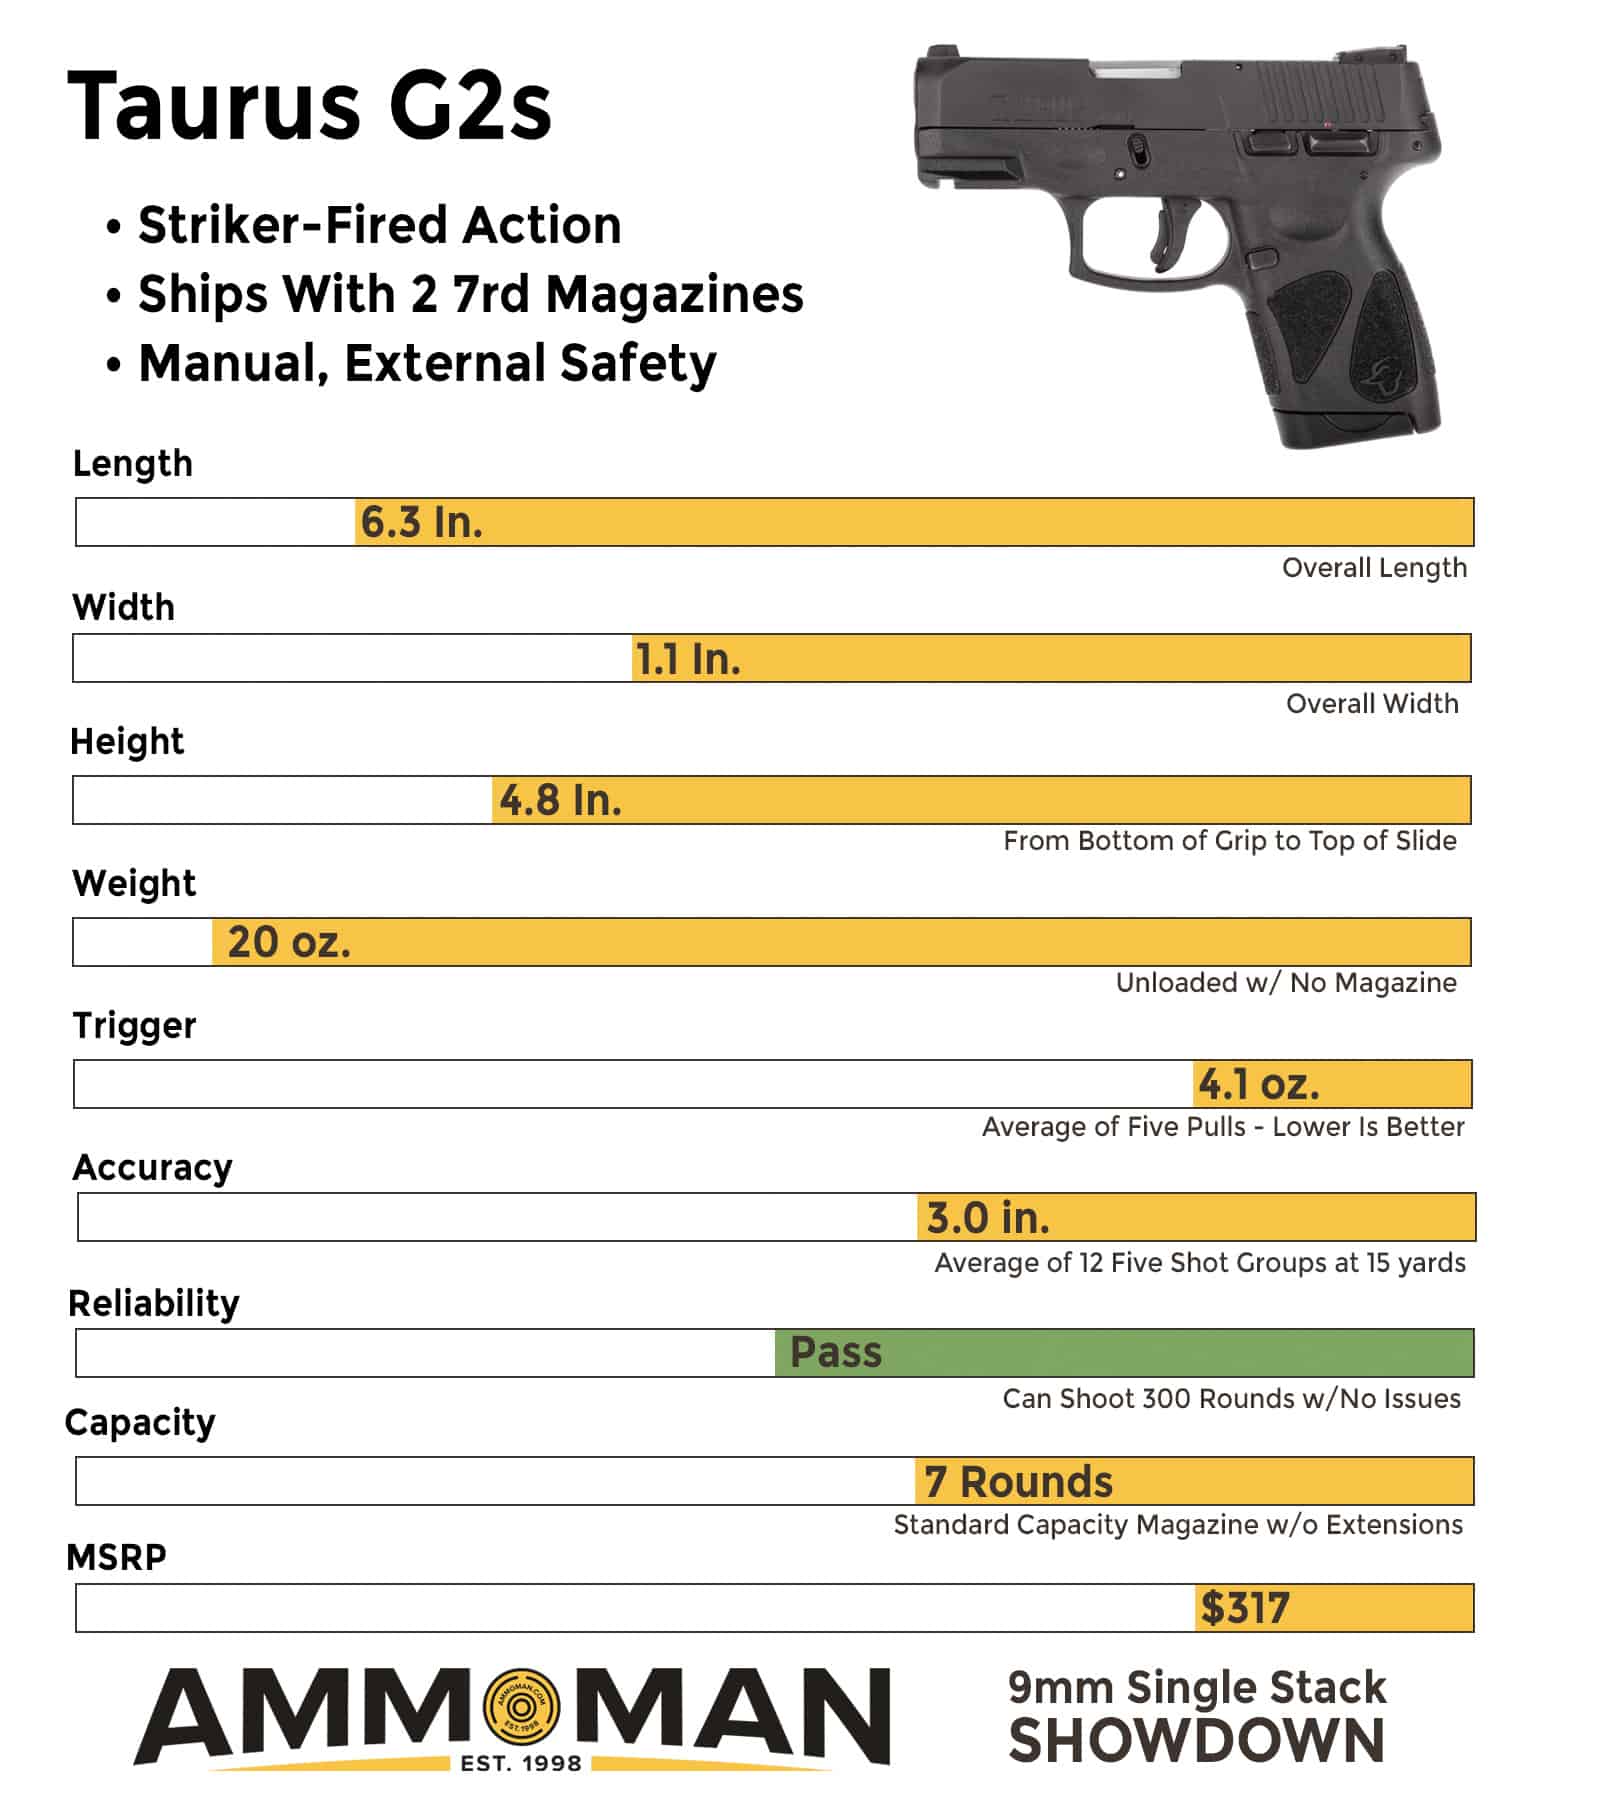 How the Taurus G2s compares to other compact 9mm pistols